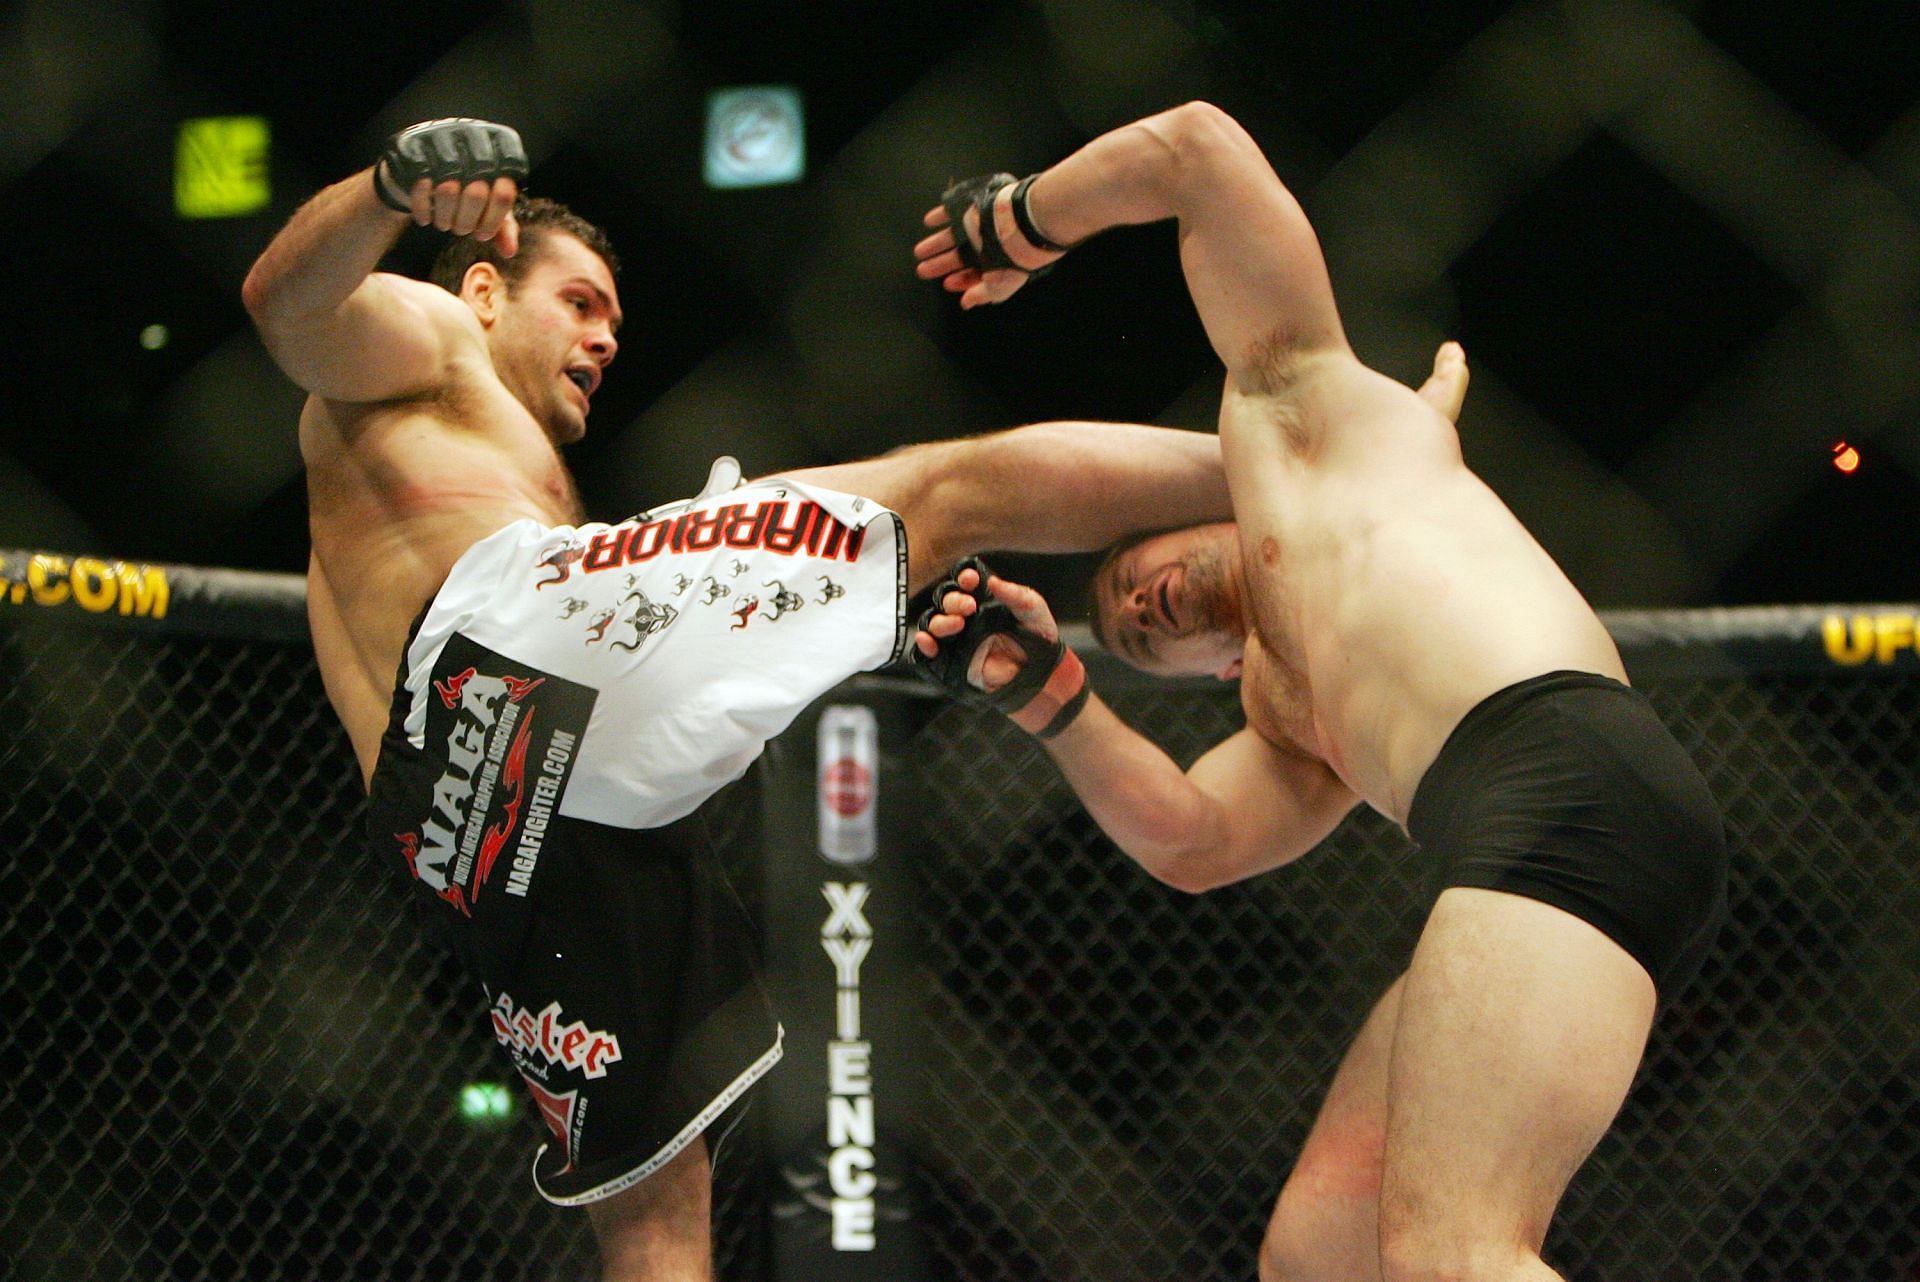 Gabriel Gonzaga looked like a future champion when he knocked out Mirko Cro Cop, but he failed to hit those heights